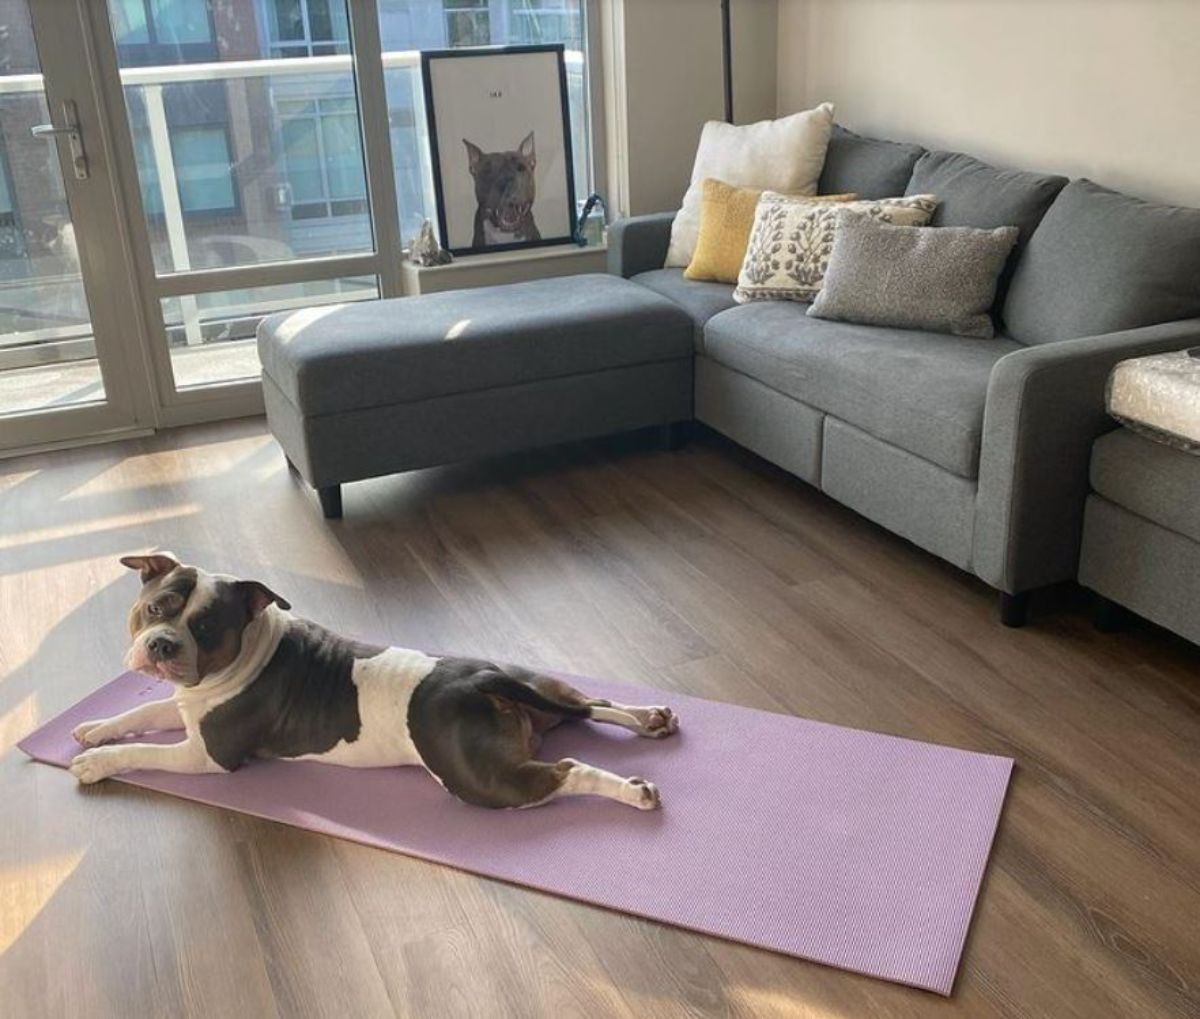 brown and white dog laying stretched on a purple yoga mat